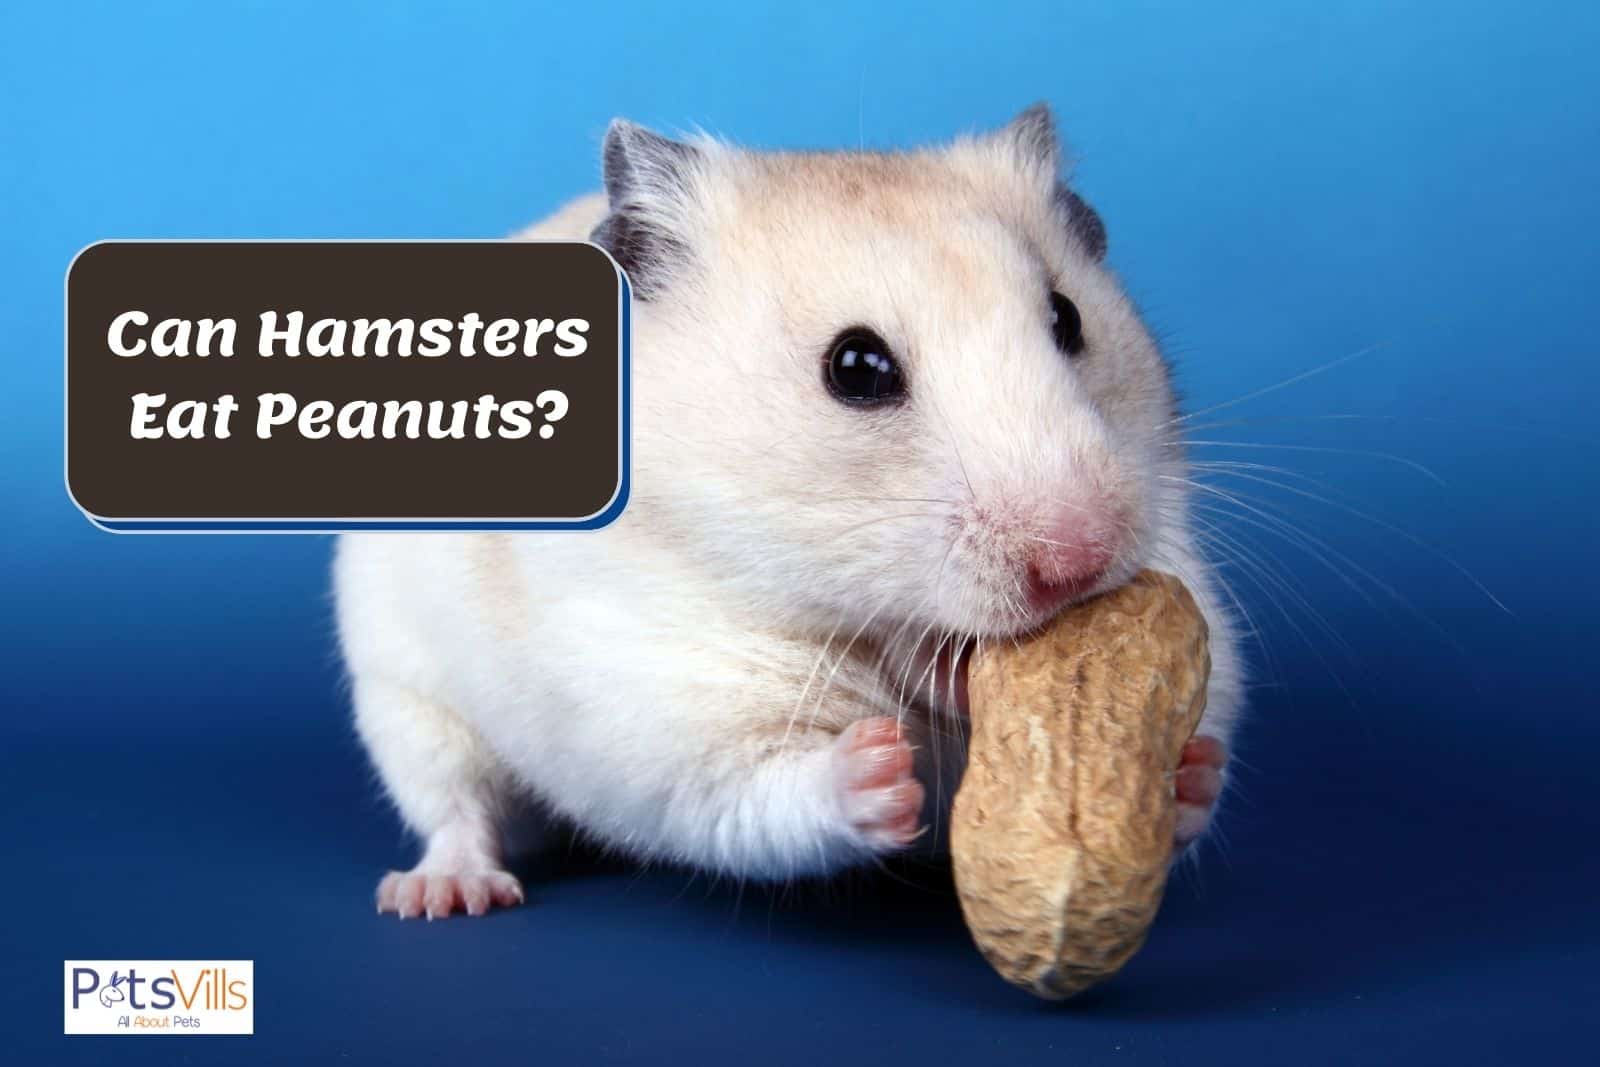 hamster eating a peanut but Can Hamsters eat peanuts safely?